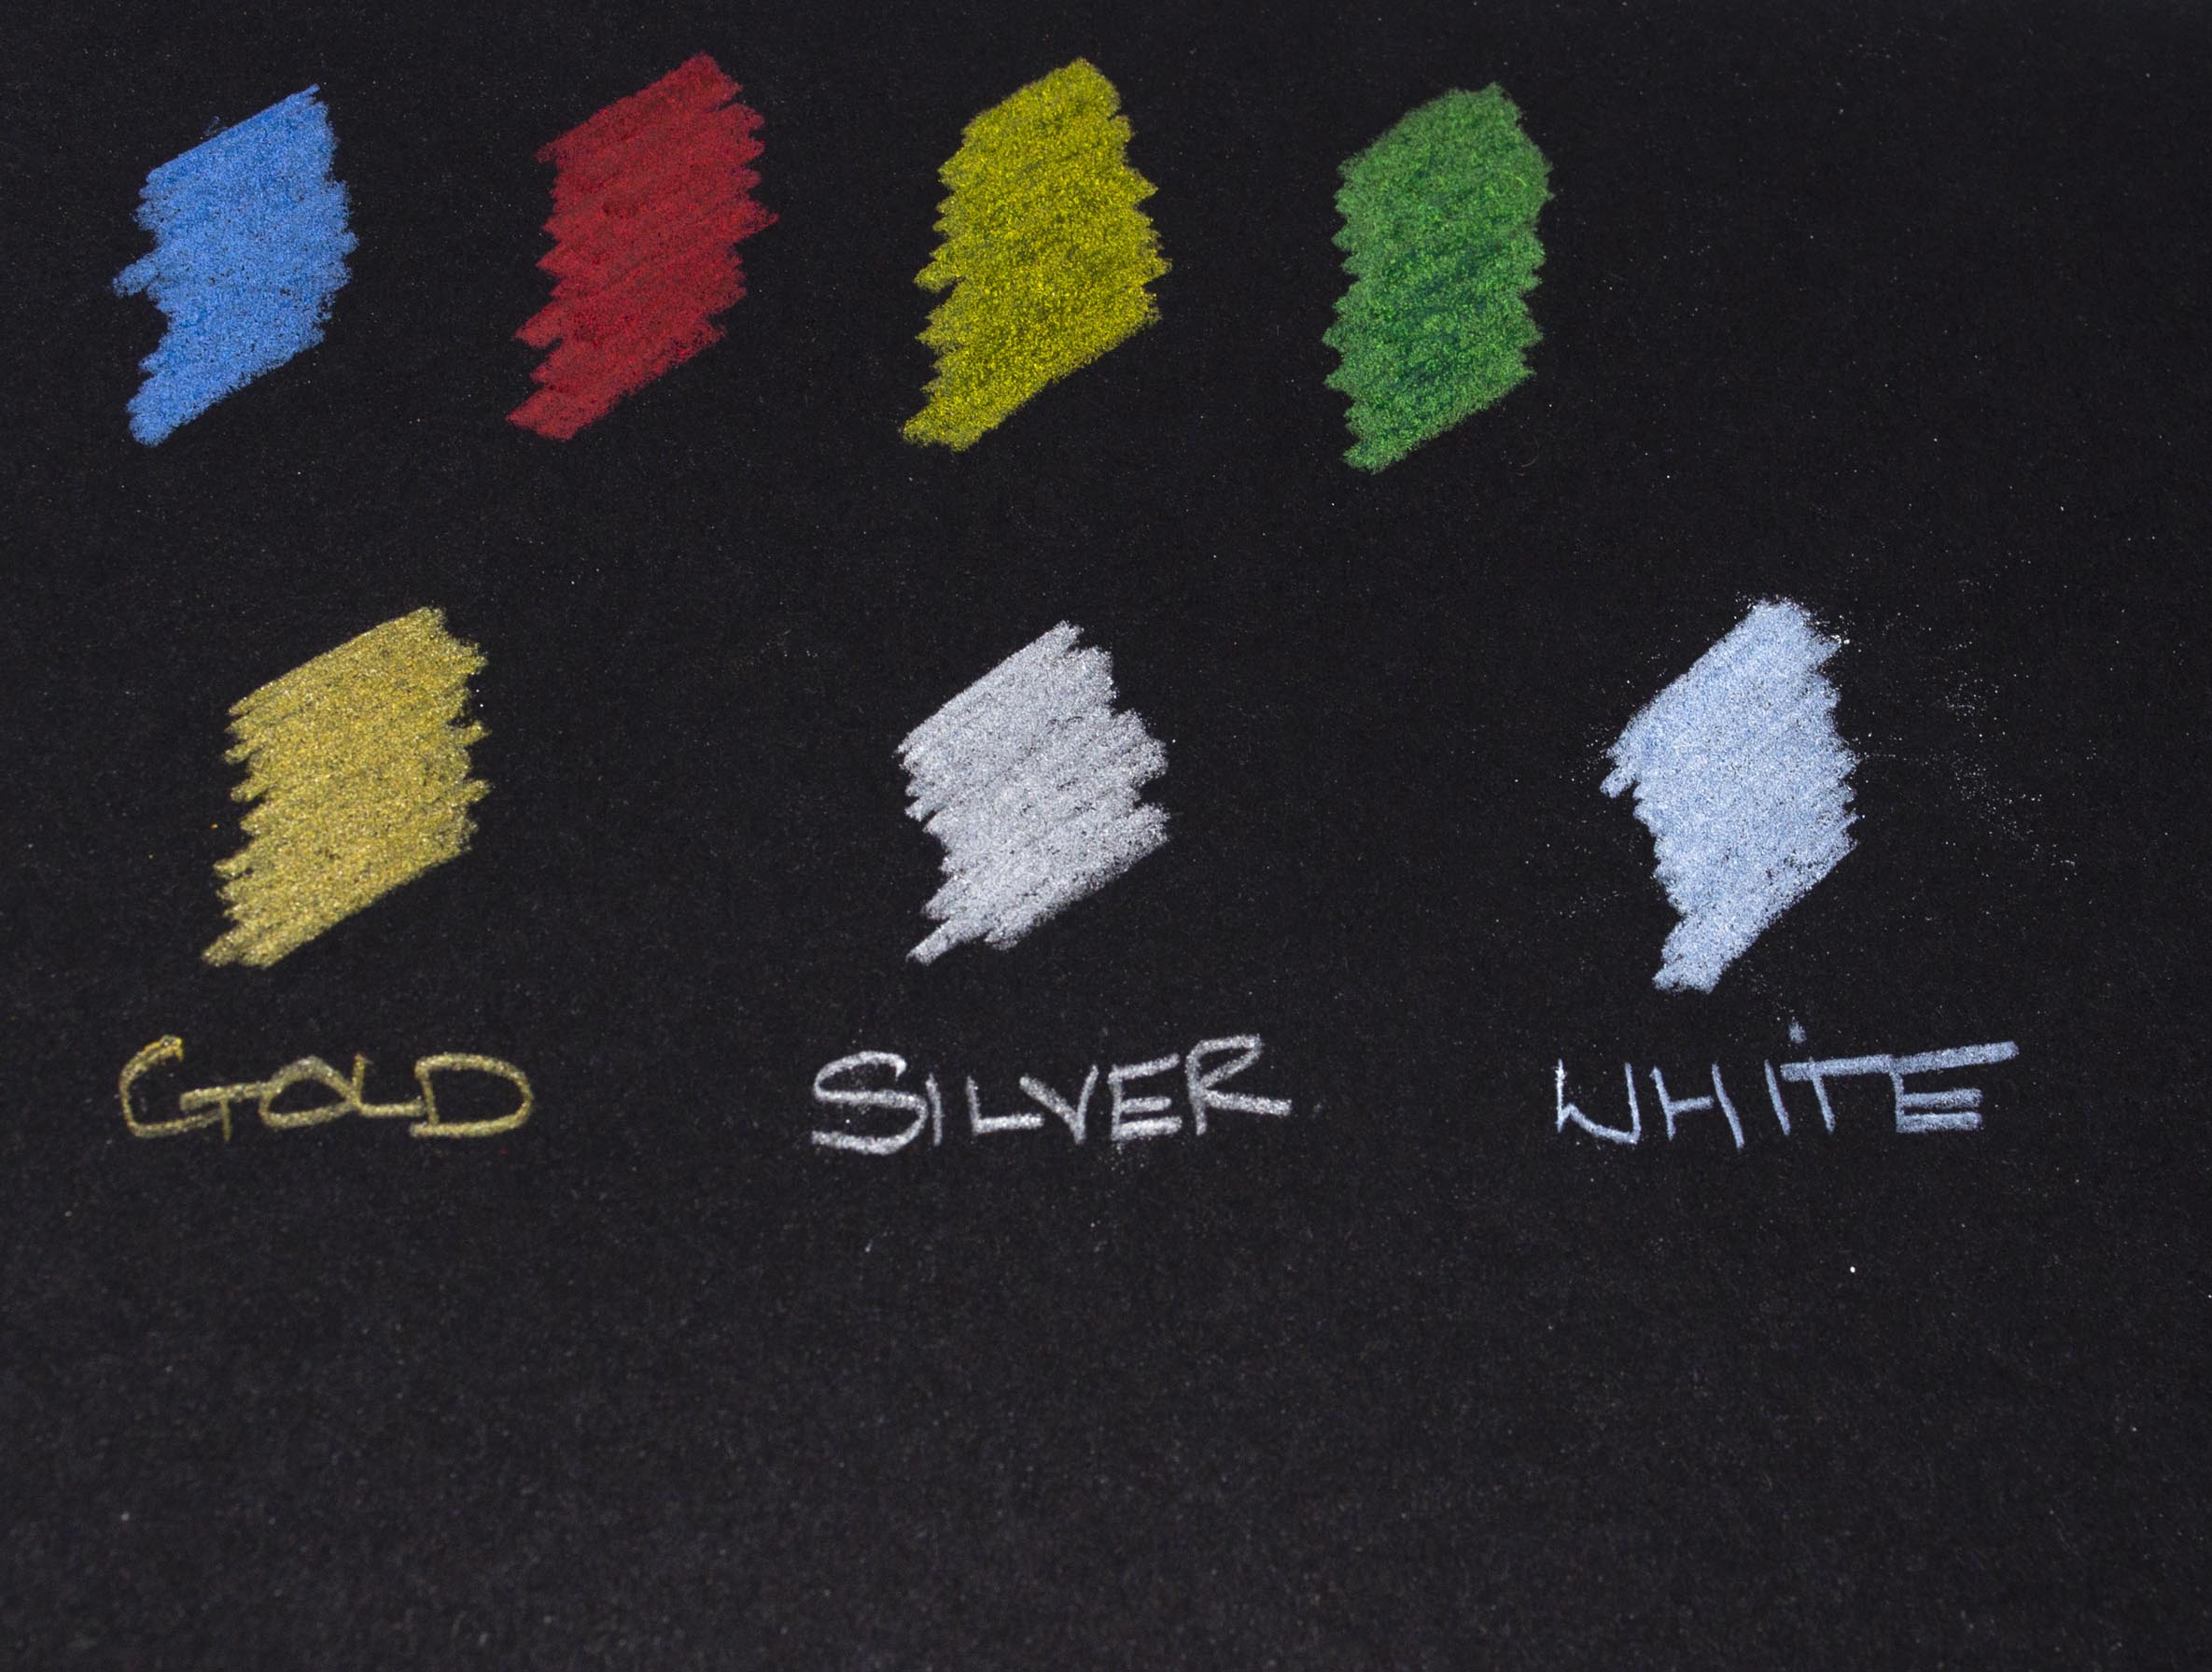 Faber Castell Classic Colour — The Art Gear Guide